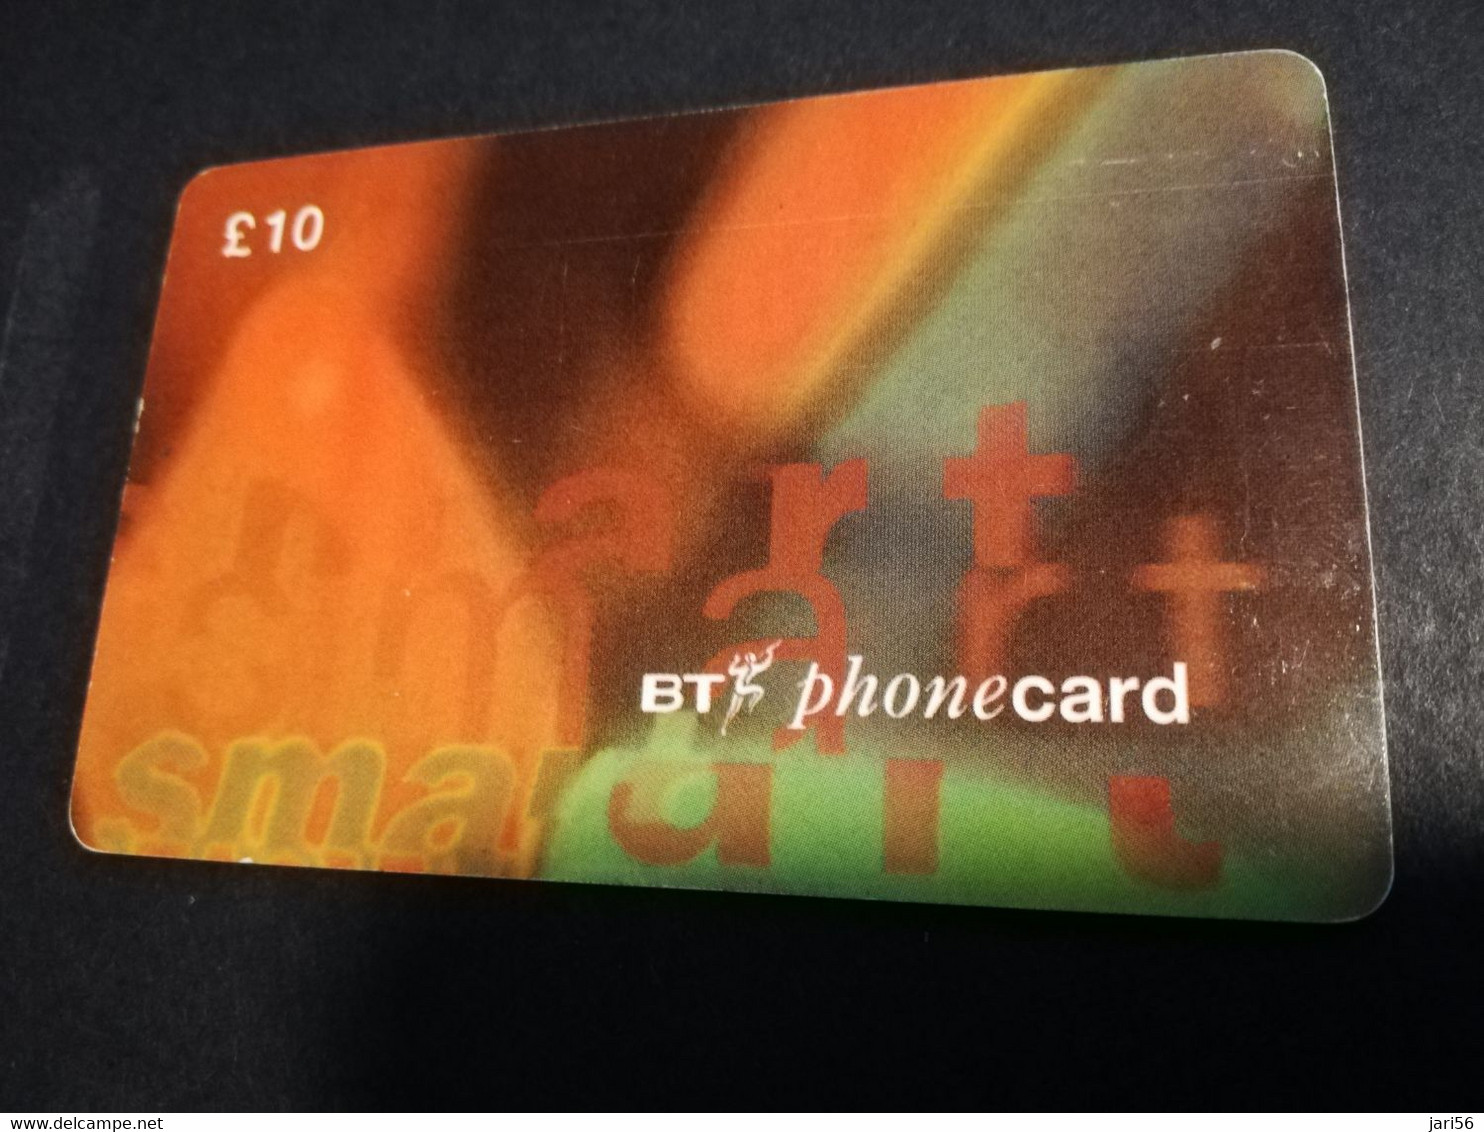 GREAT BRETAGNE  CHIPCARDS / TEST CARD 10 POUND    EXPIRY DATE 09/96   PERFECT  CONDITION     **4597** - BT Generale